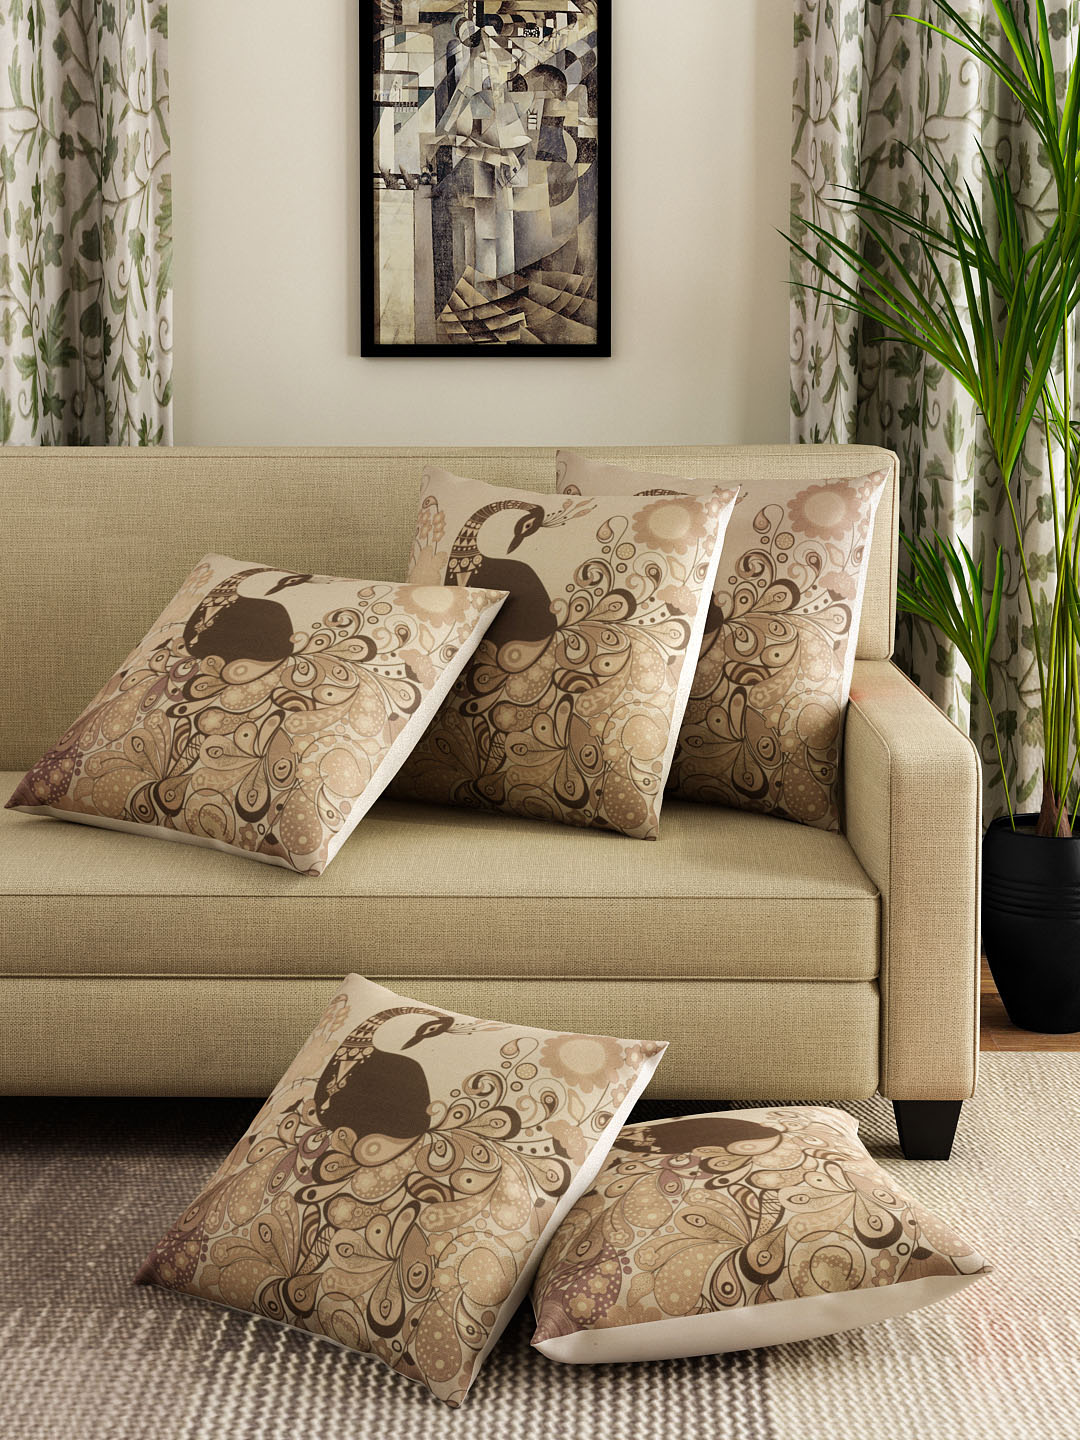 Detec™ Hosta Beige 16 x 16 inches Printed Cushioned Cover (Set of 5 )